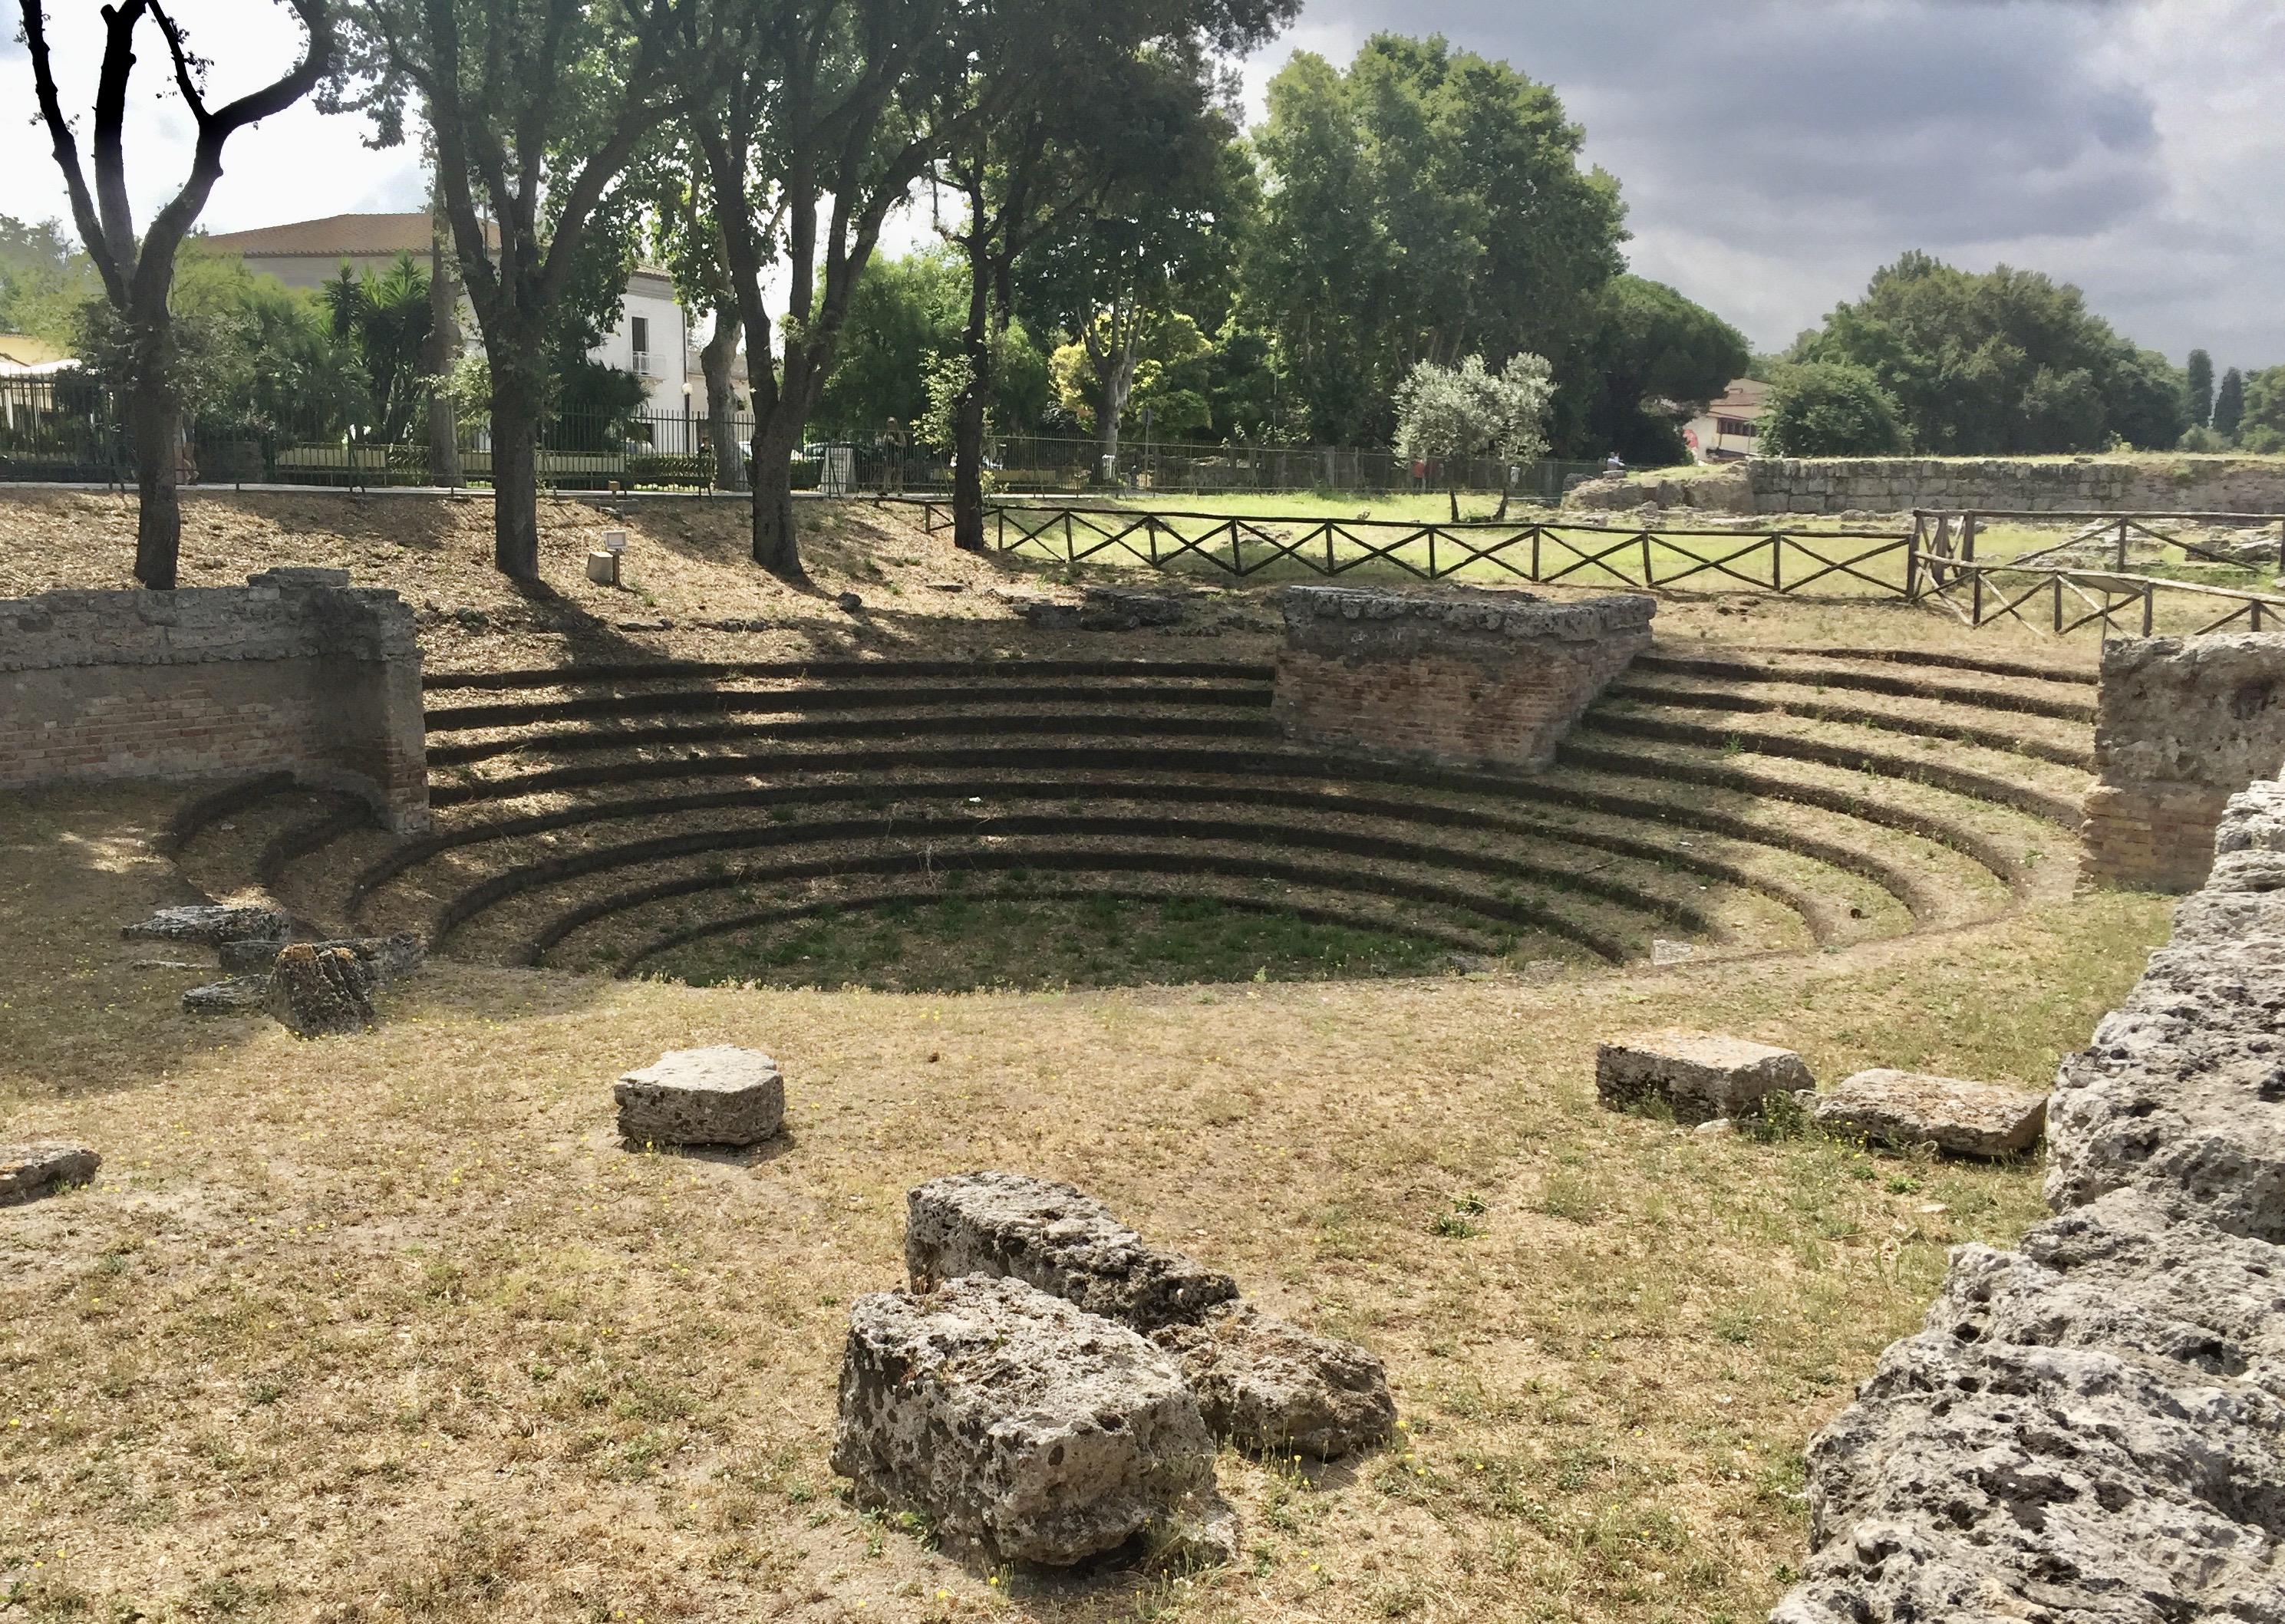 Unroofed, circular meeting place for a civic deliberative body at the agora of Paestum, a Greek colony in southern Italy, c.450 BCE. It may be an ekklesiasterion, or popular assembly. The space may instead be a bouleuterion, the lot-selected executive council, as it only held 500-600 people.